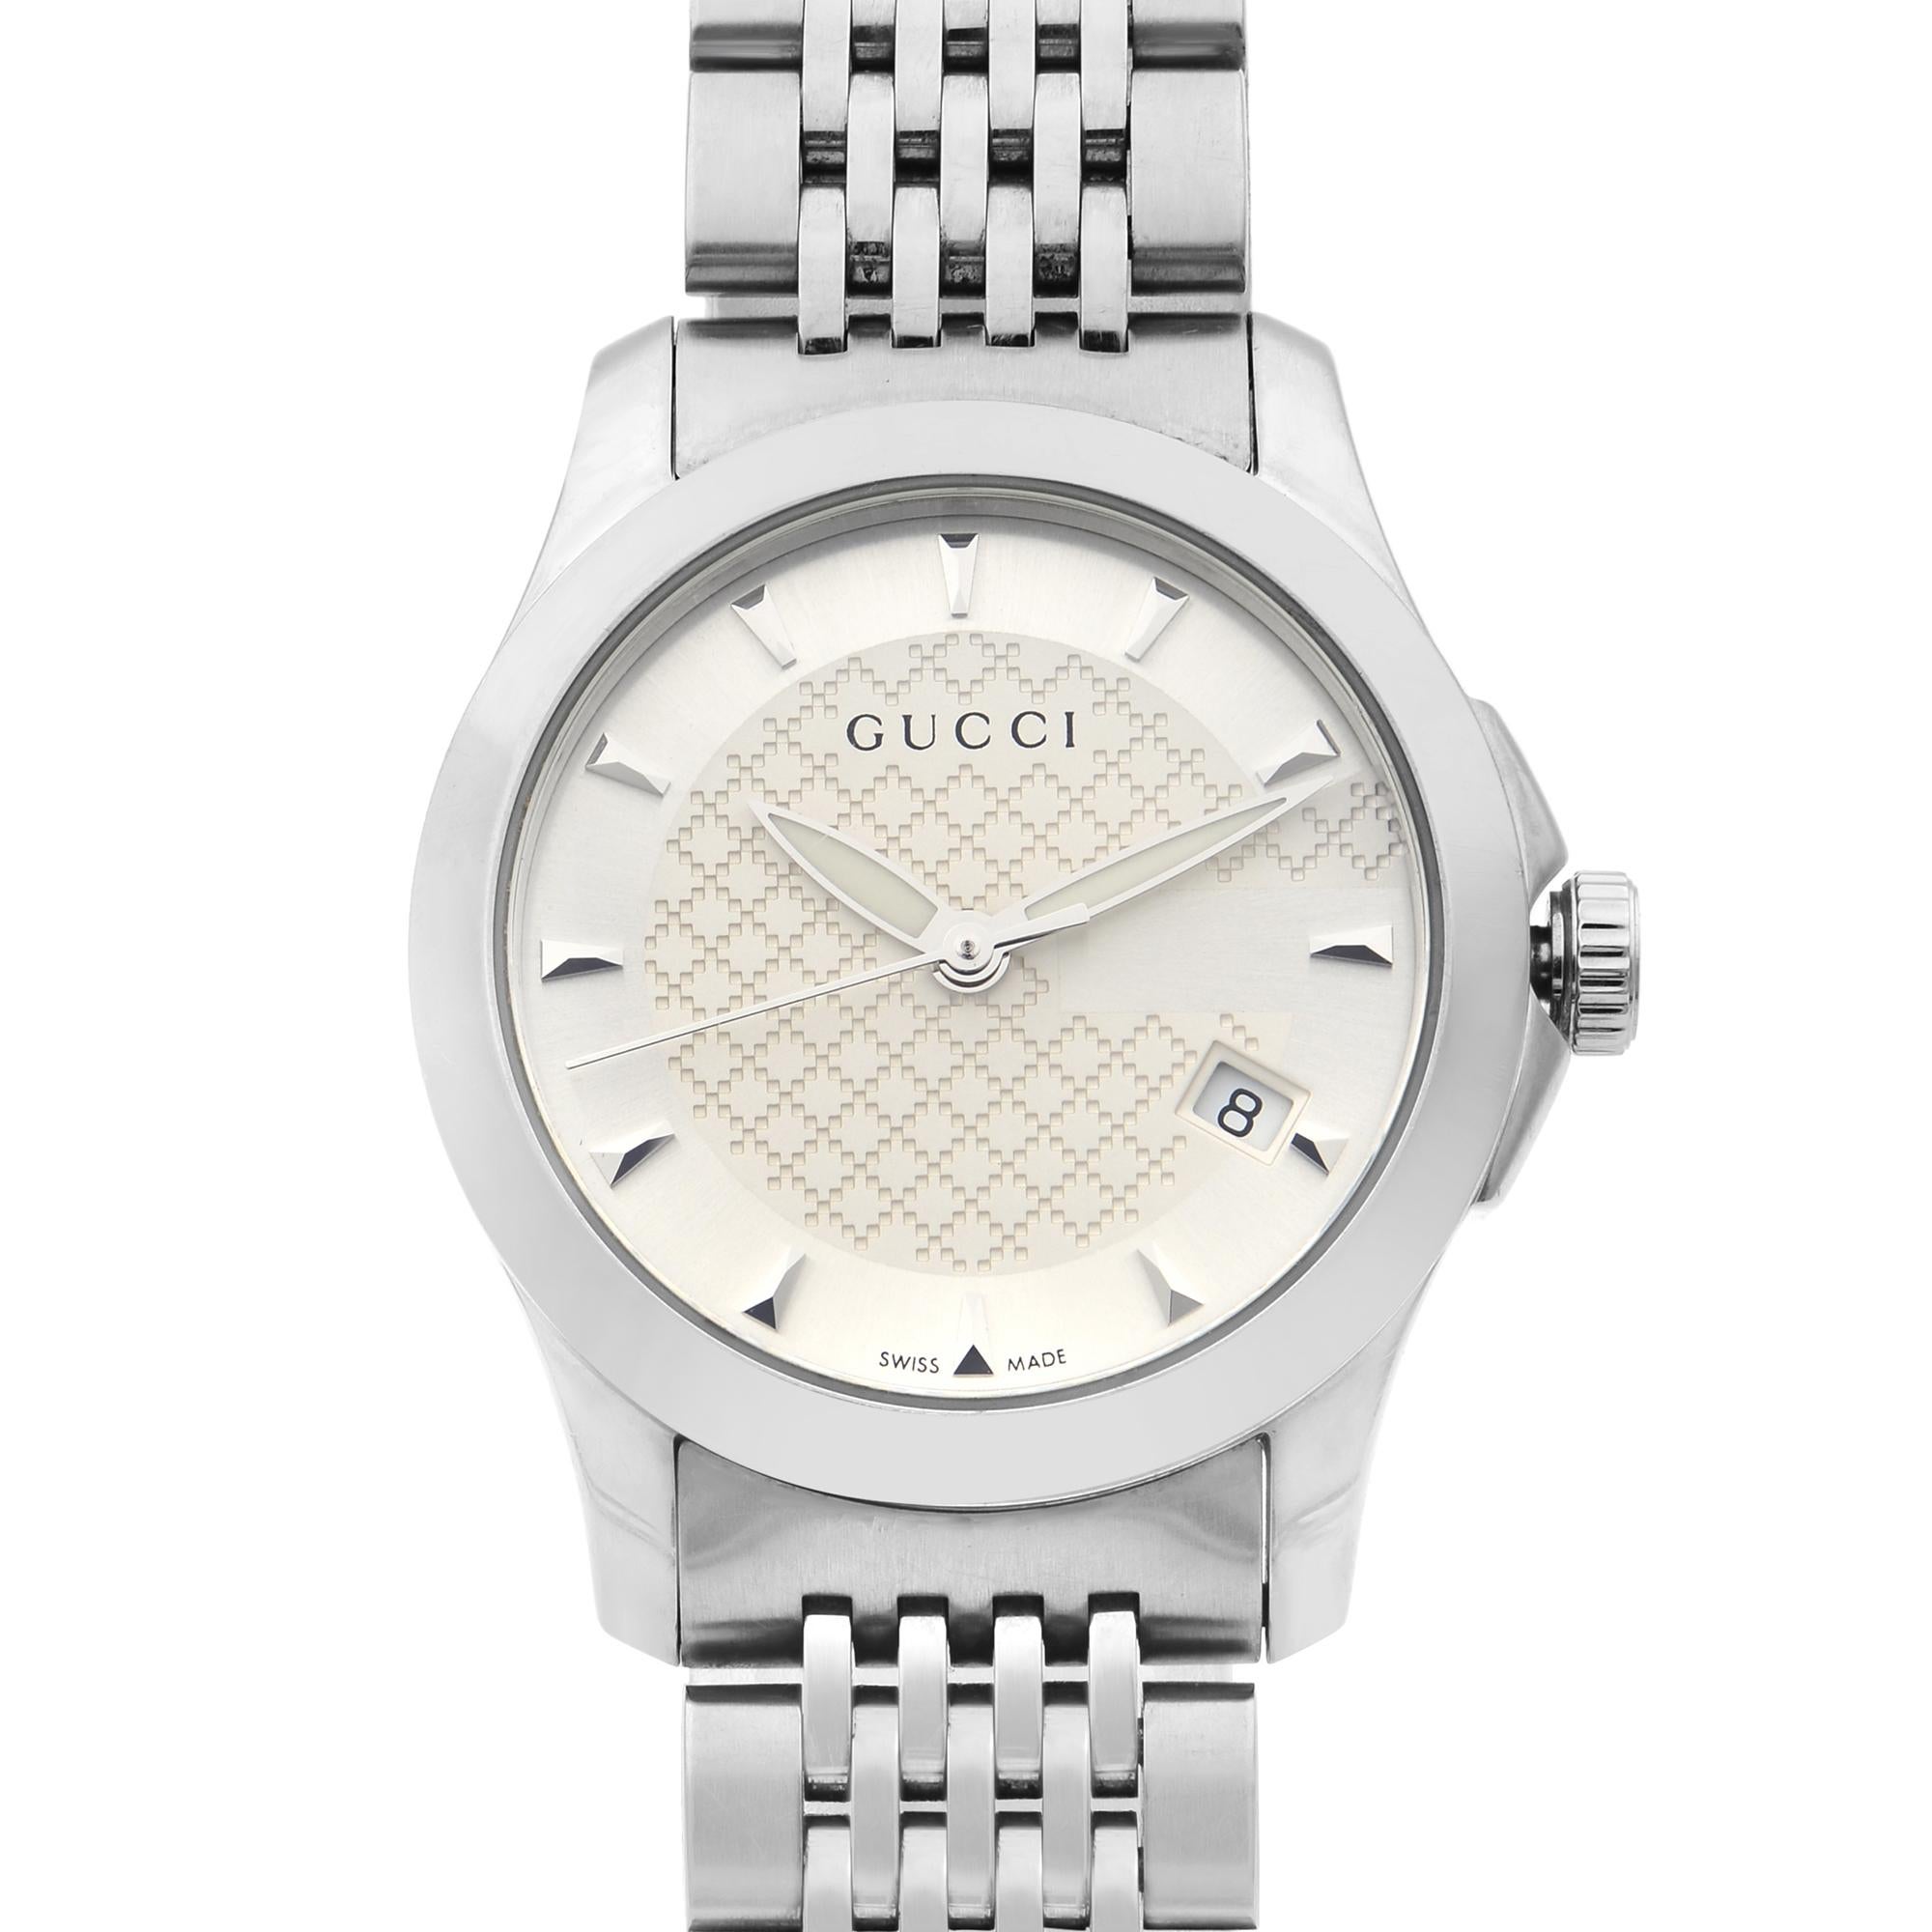 This pre-owned Gucci G-Timeless YA126501 is a beautiful Ladie's timepiece that is powered by quartz (battery) movement which is cased in a stainless steel case. It has a round shape face, date indicator dial and has hand sticks style markers. It is